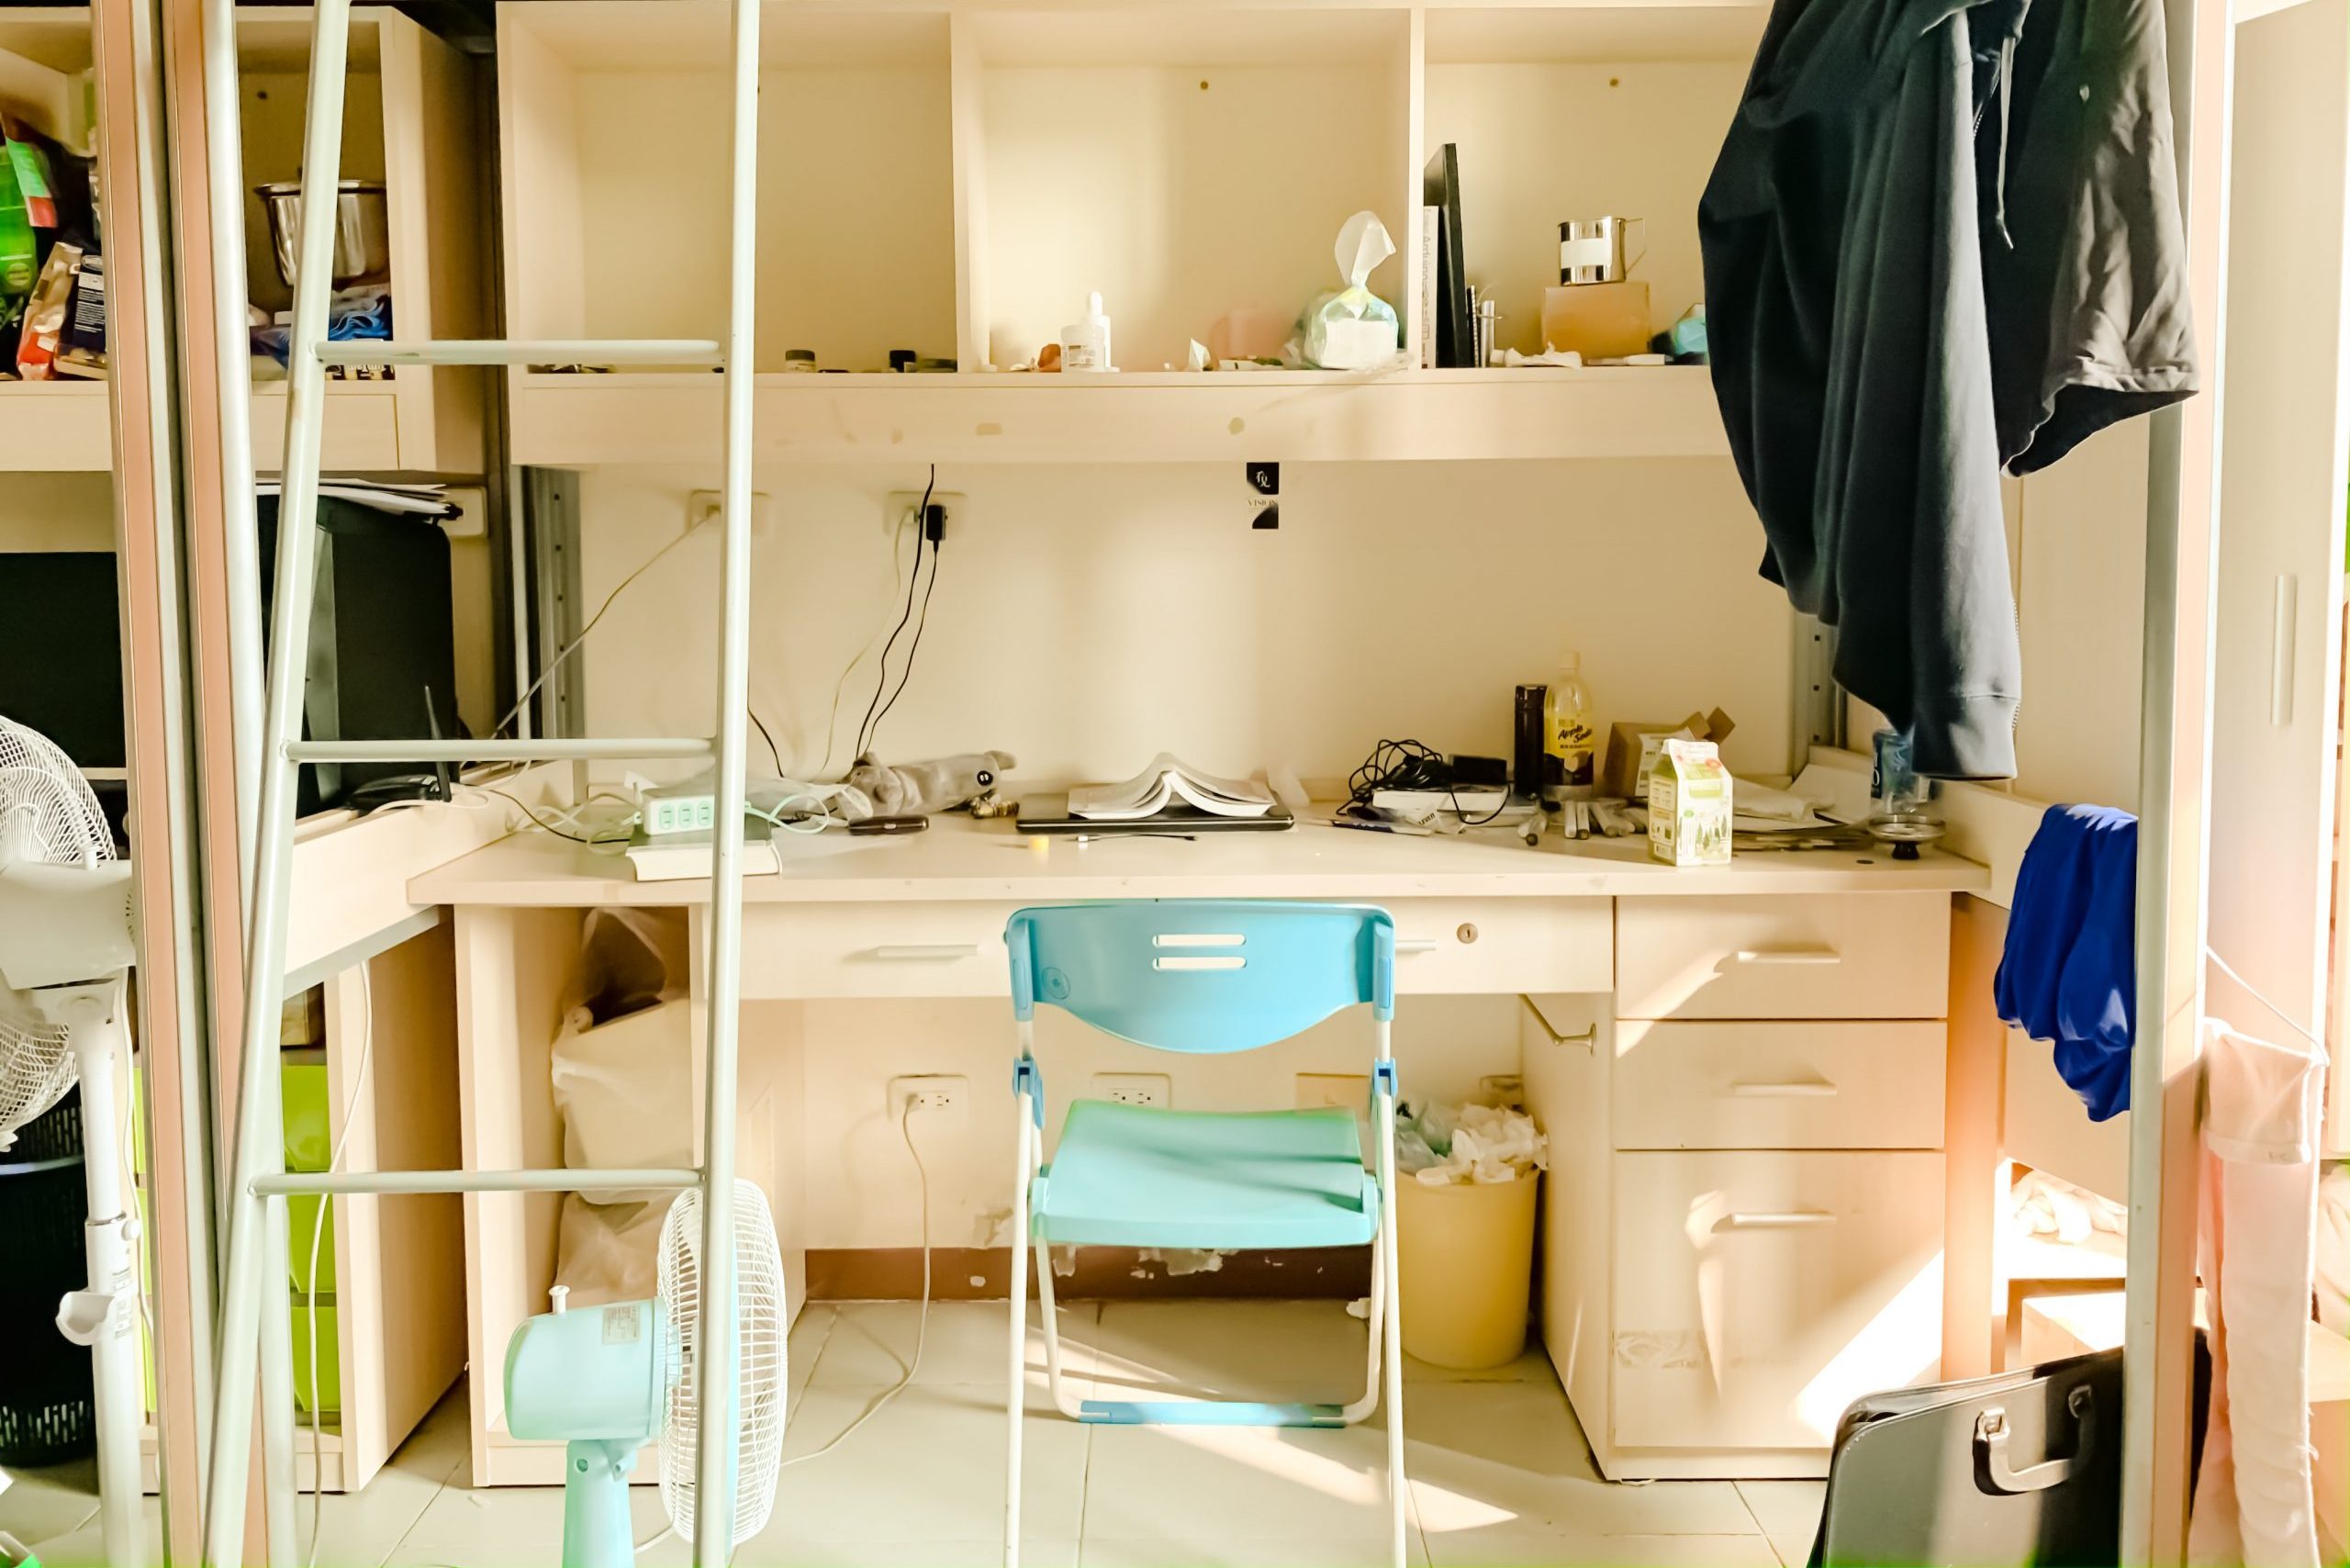 Photo of a dorm room in an article about living at home.